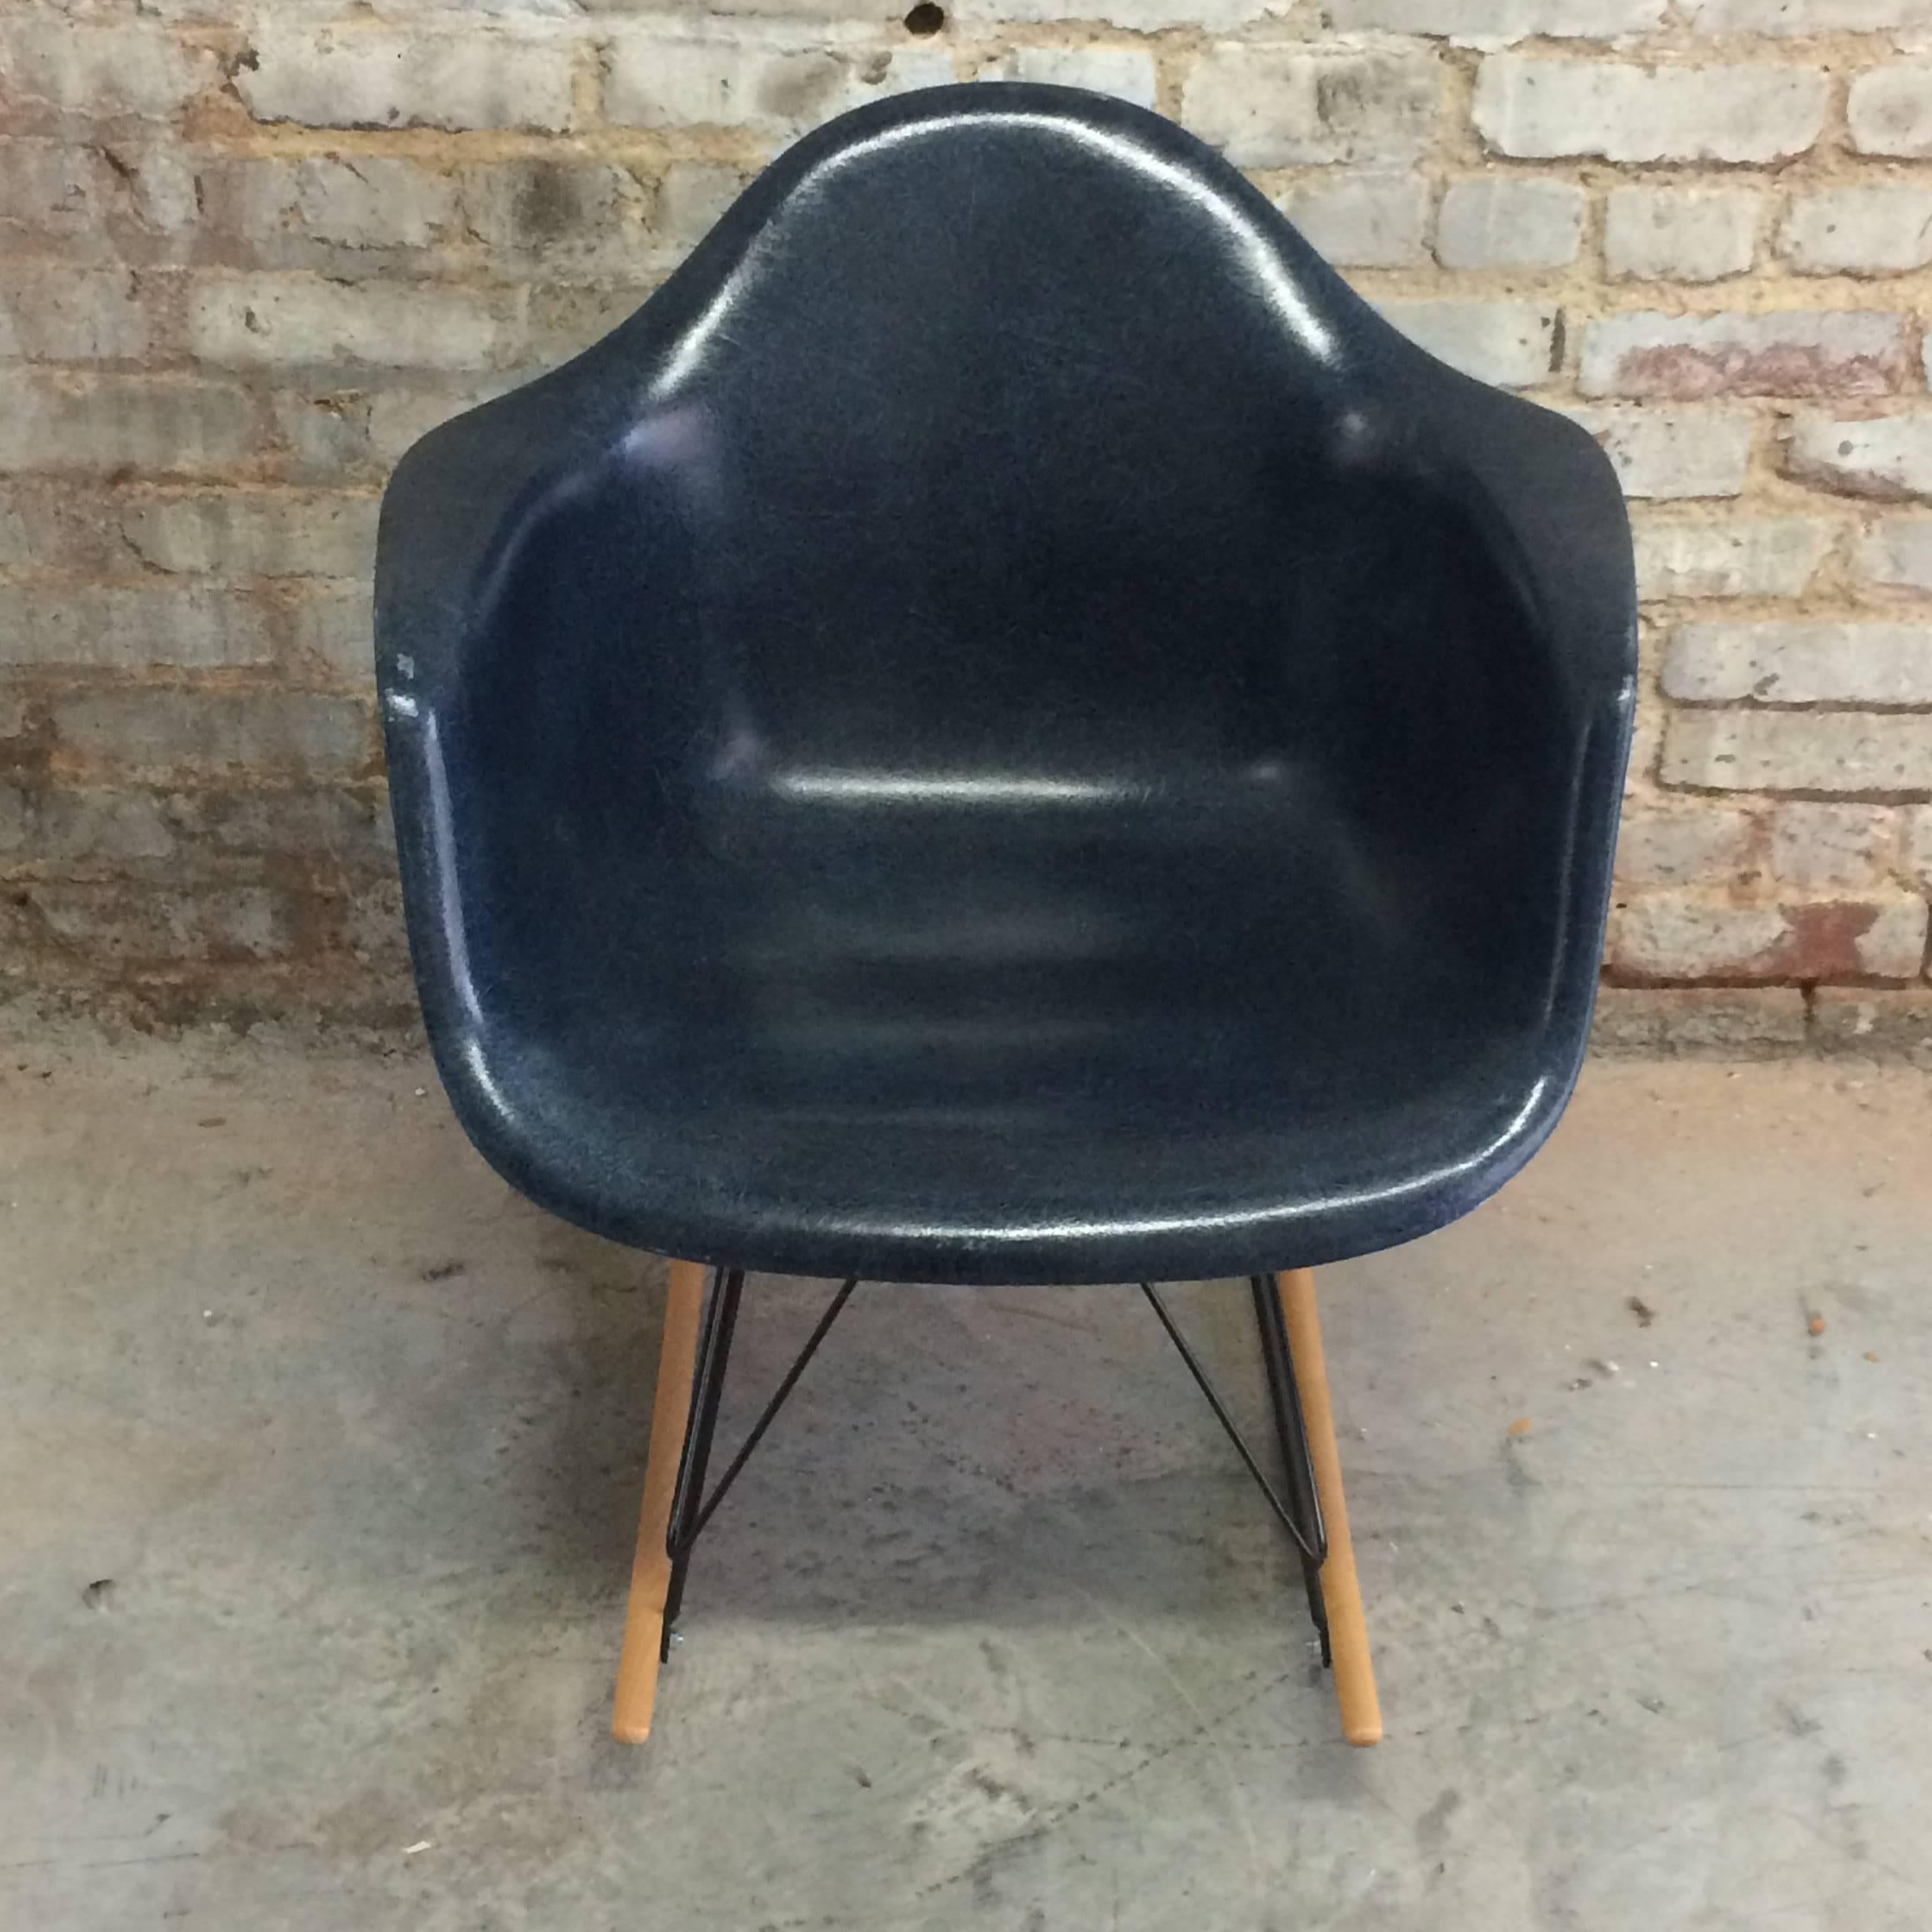 Navy blue Herman Miller Eames rocker on new base. Chair dates to late 1950s. Excellent condition with no fading or cracks. Normal wear from age and use. Base available in chrome as well. Runners in birch.